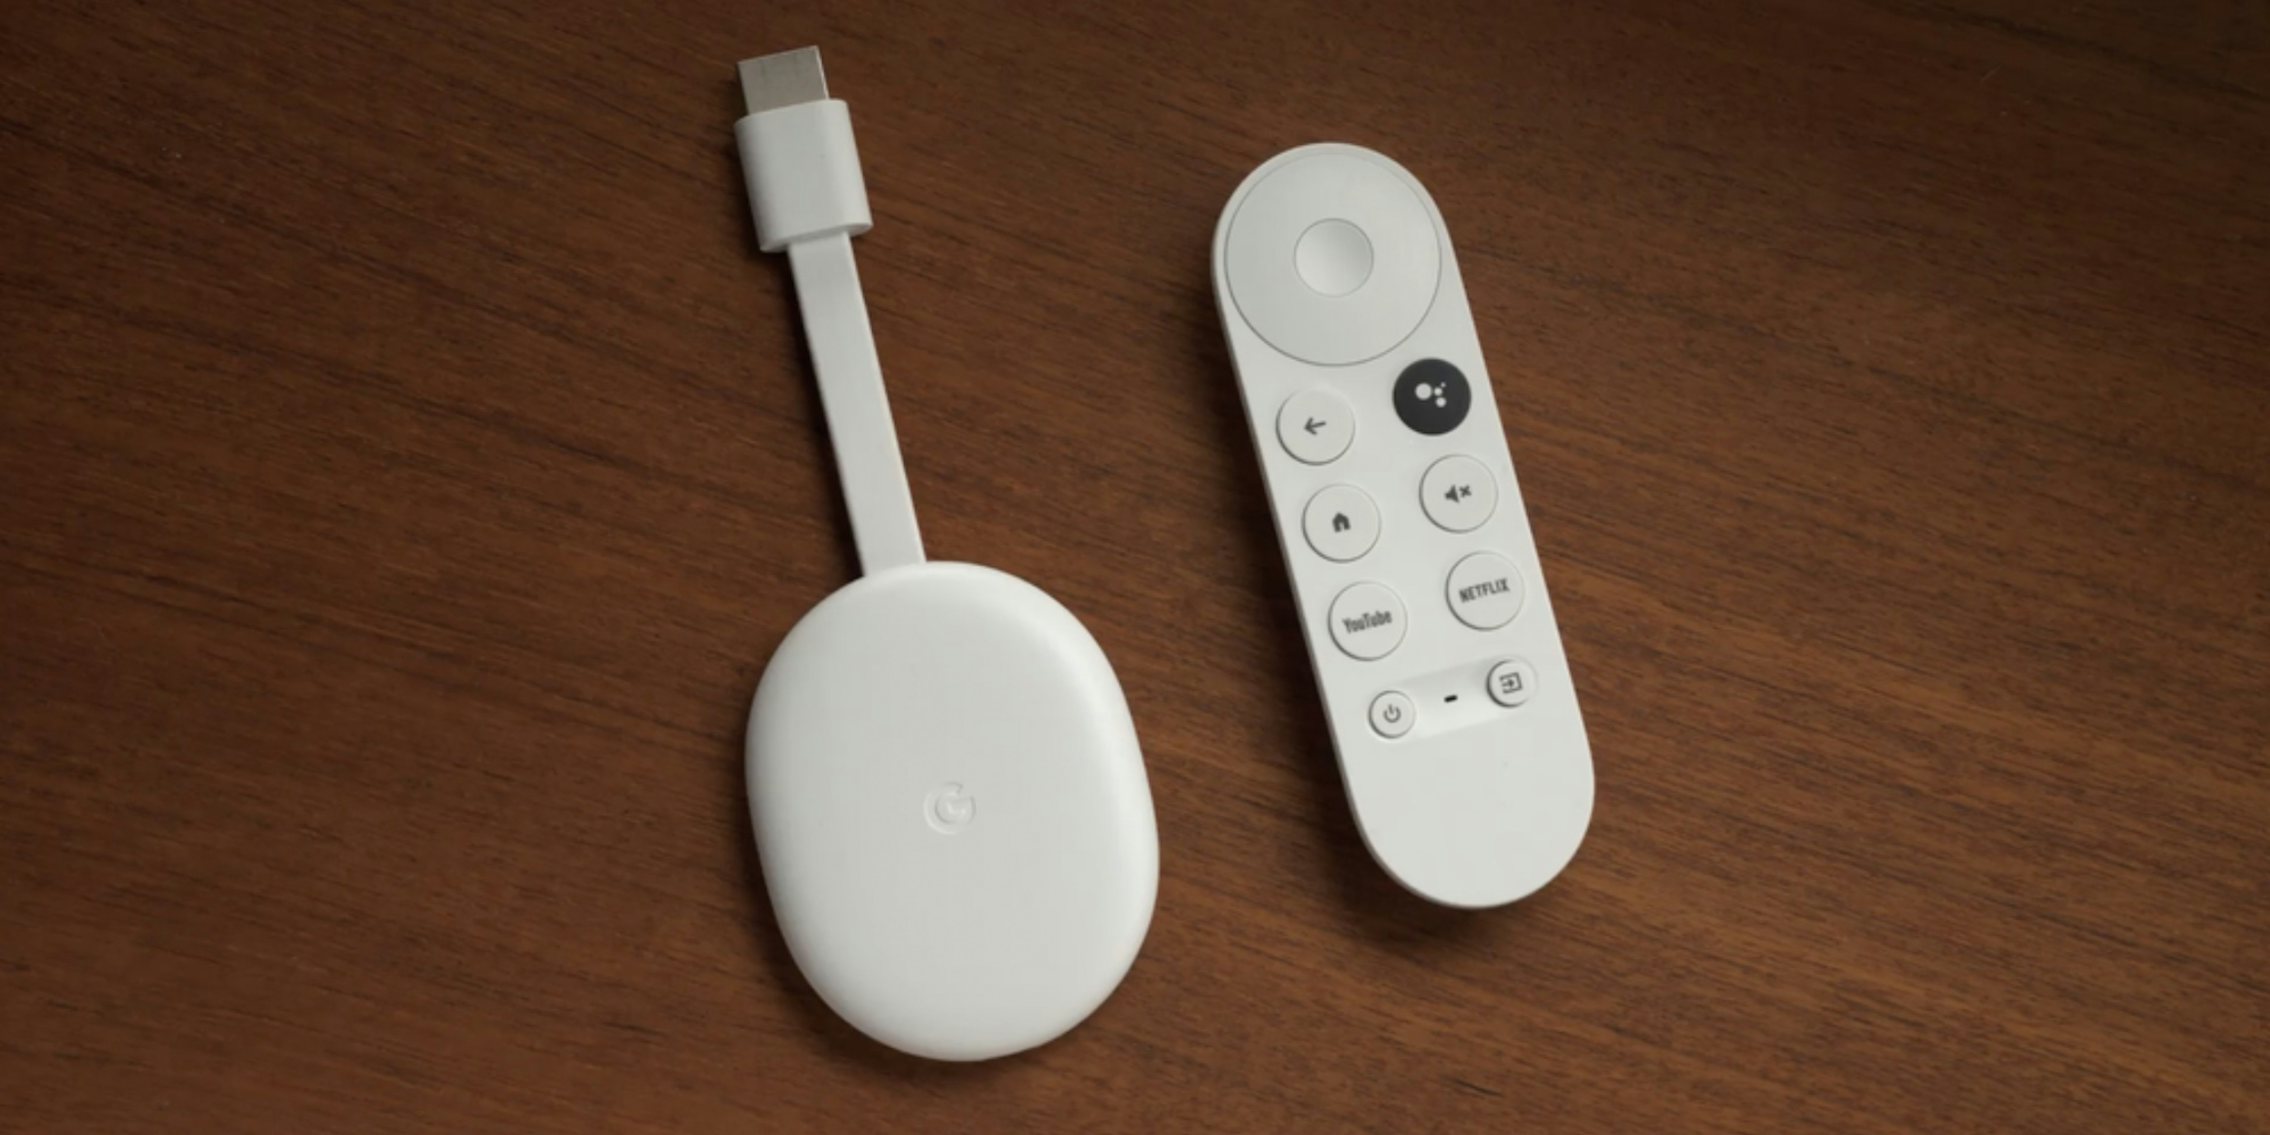 virkelighed Menstruation skorsten What Is Chromecast, and How Does It Work? Cost, Apps, and More